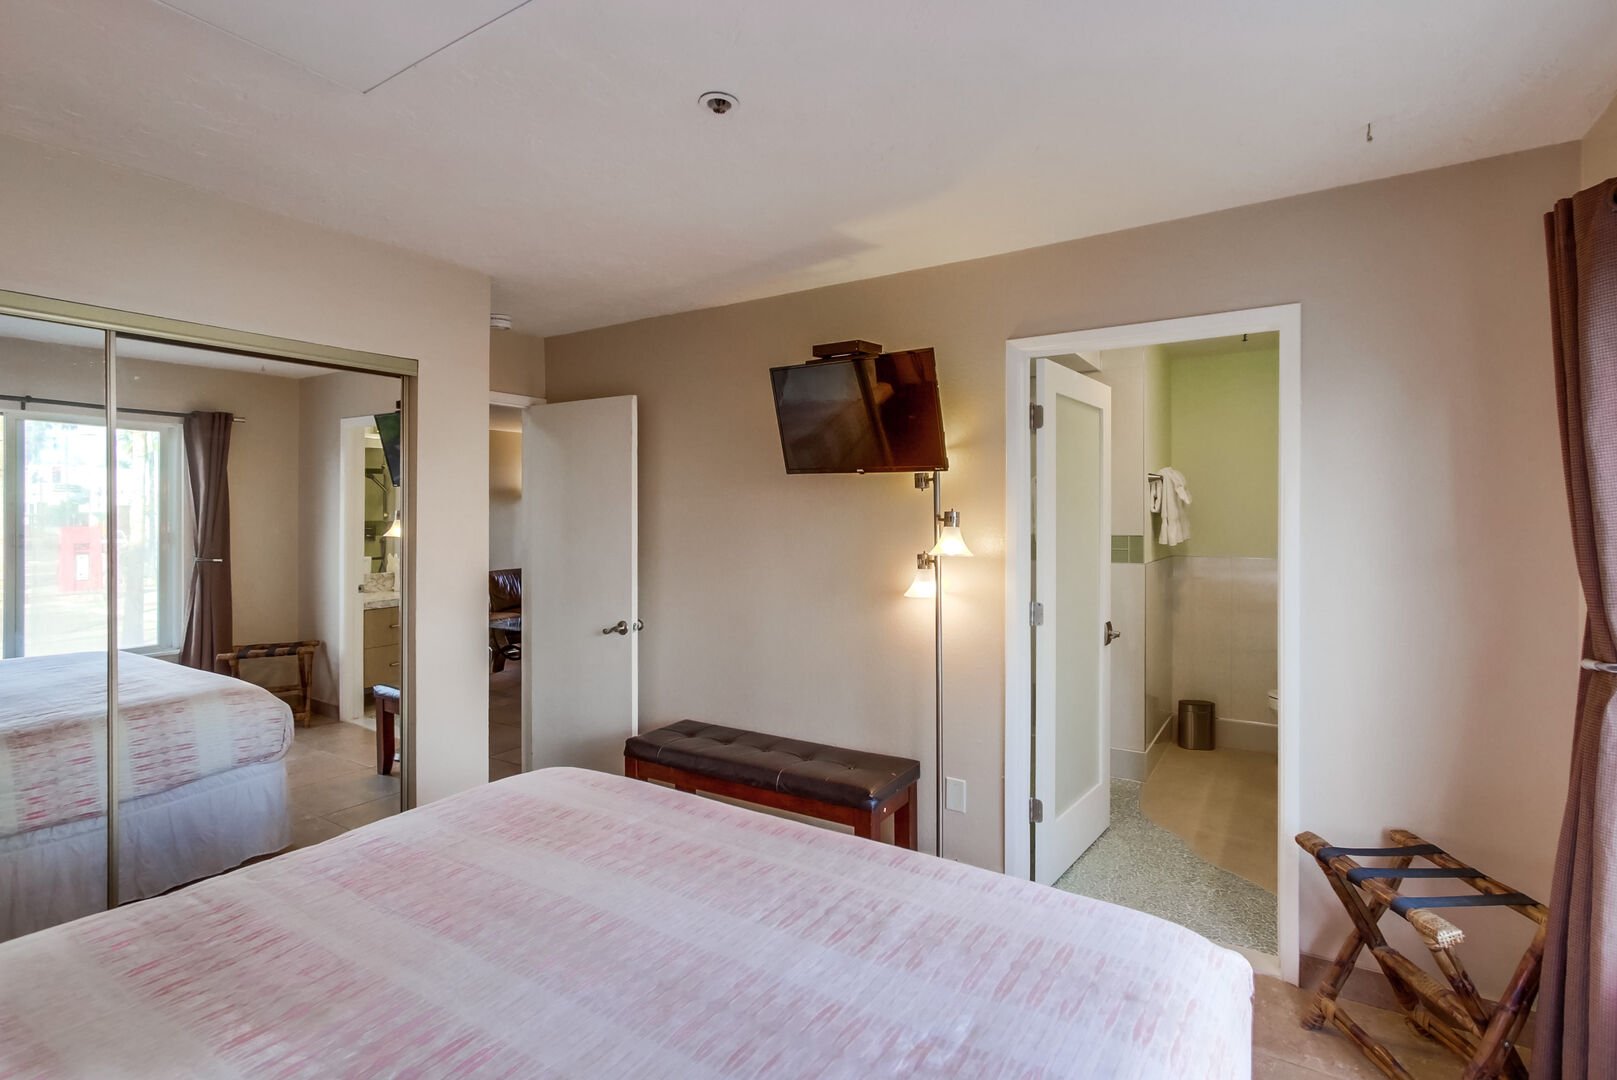 Guest or master bedroom with king size bed, mirrored closet with ample storage space, TV, and in-suite full bathroom